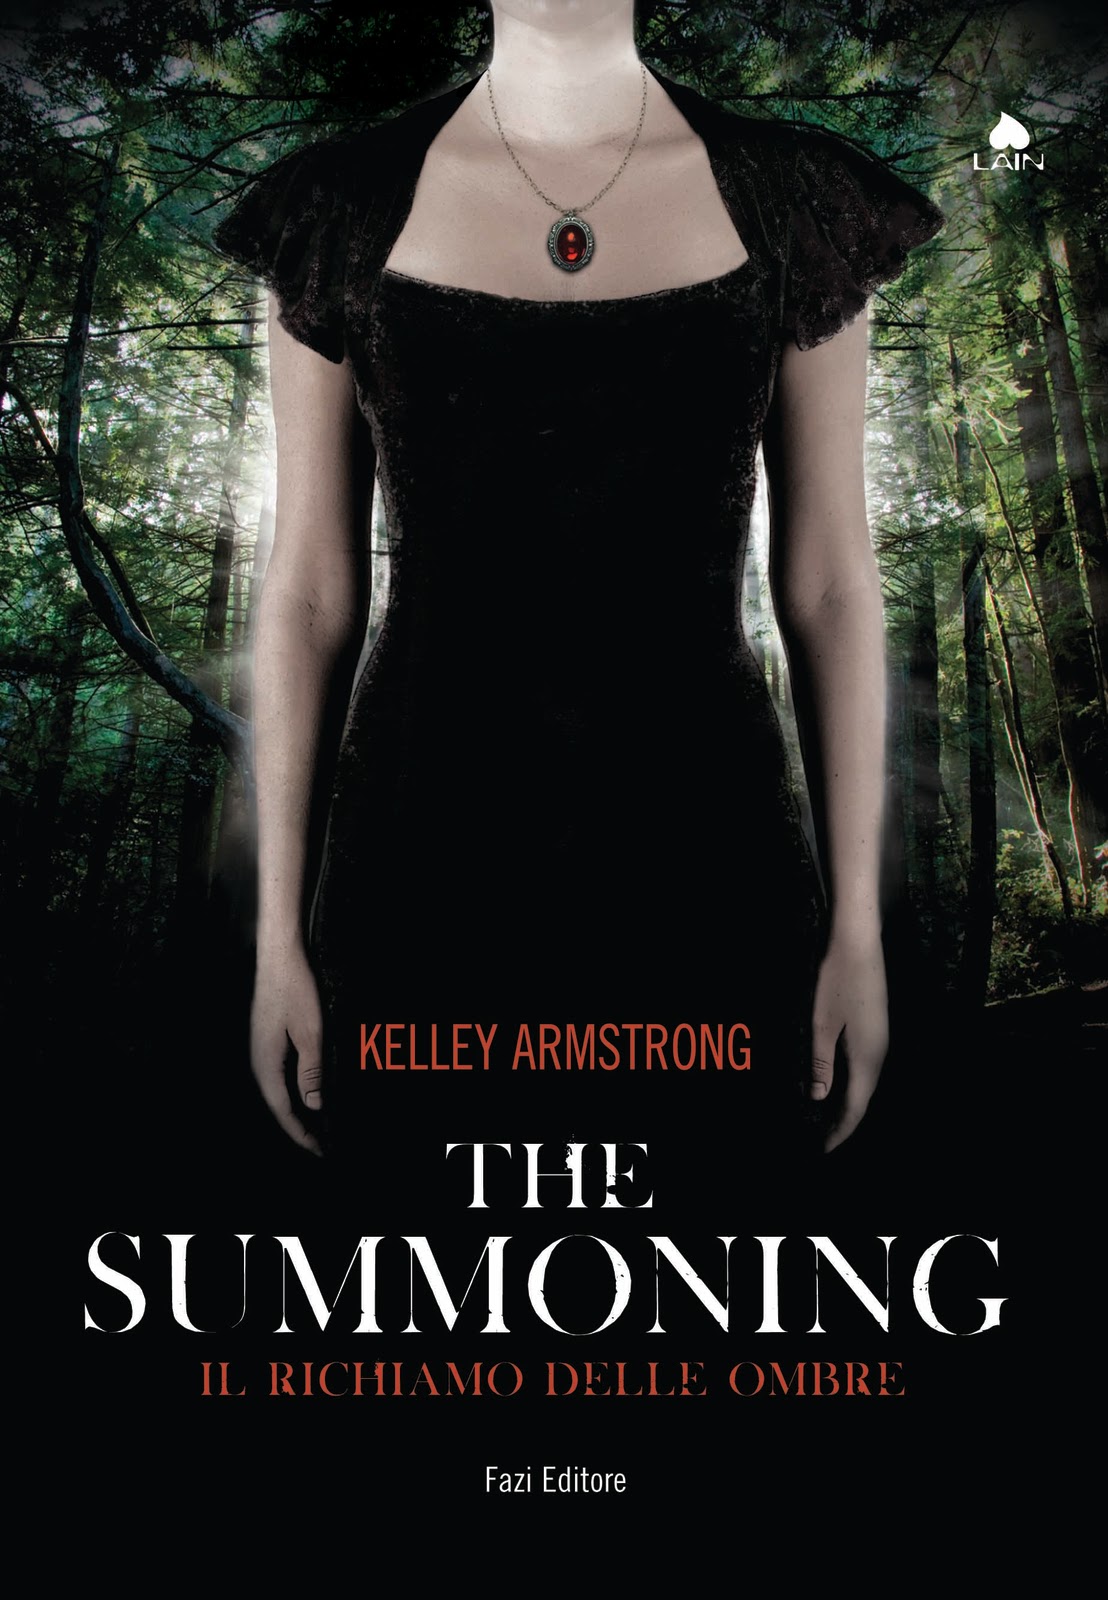 More about The summoning